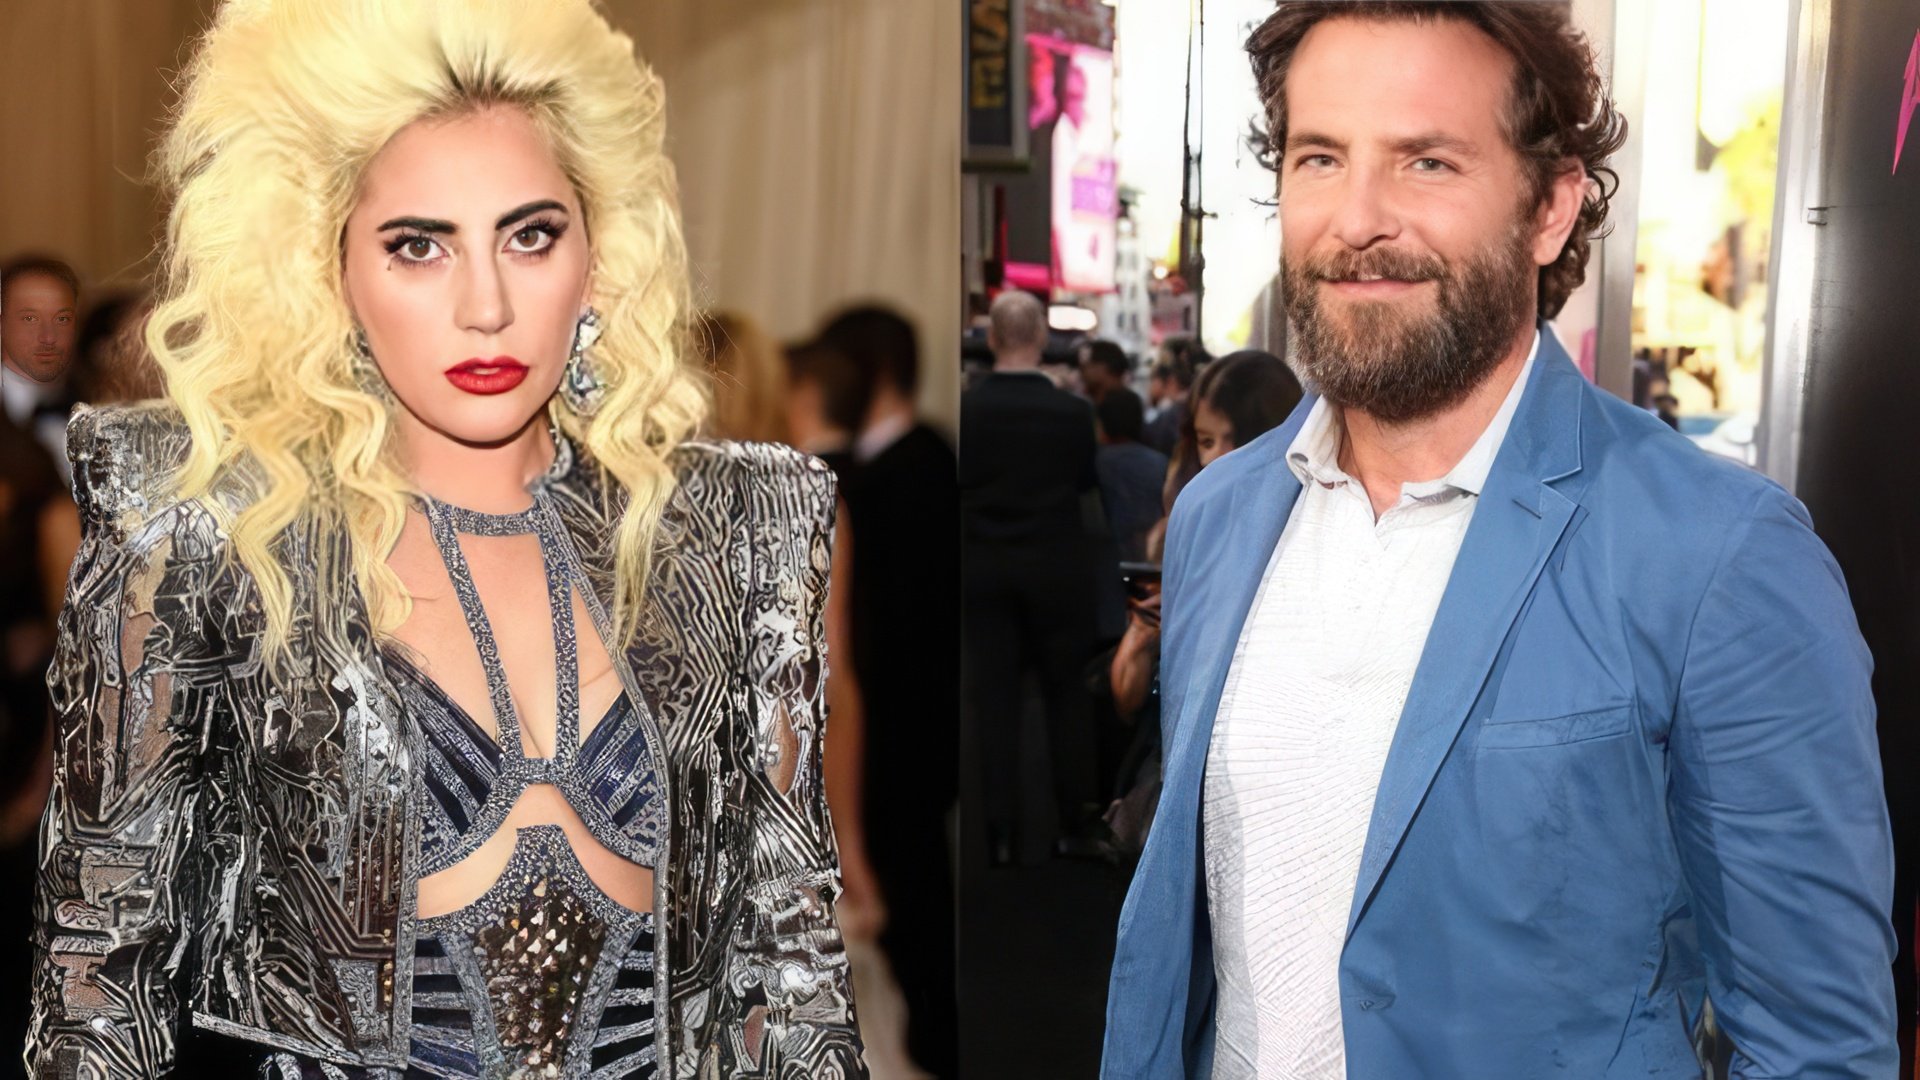 Bradley Cooper and Lady Gaga will act in the same movie